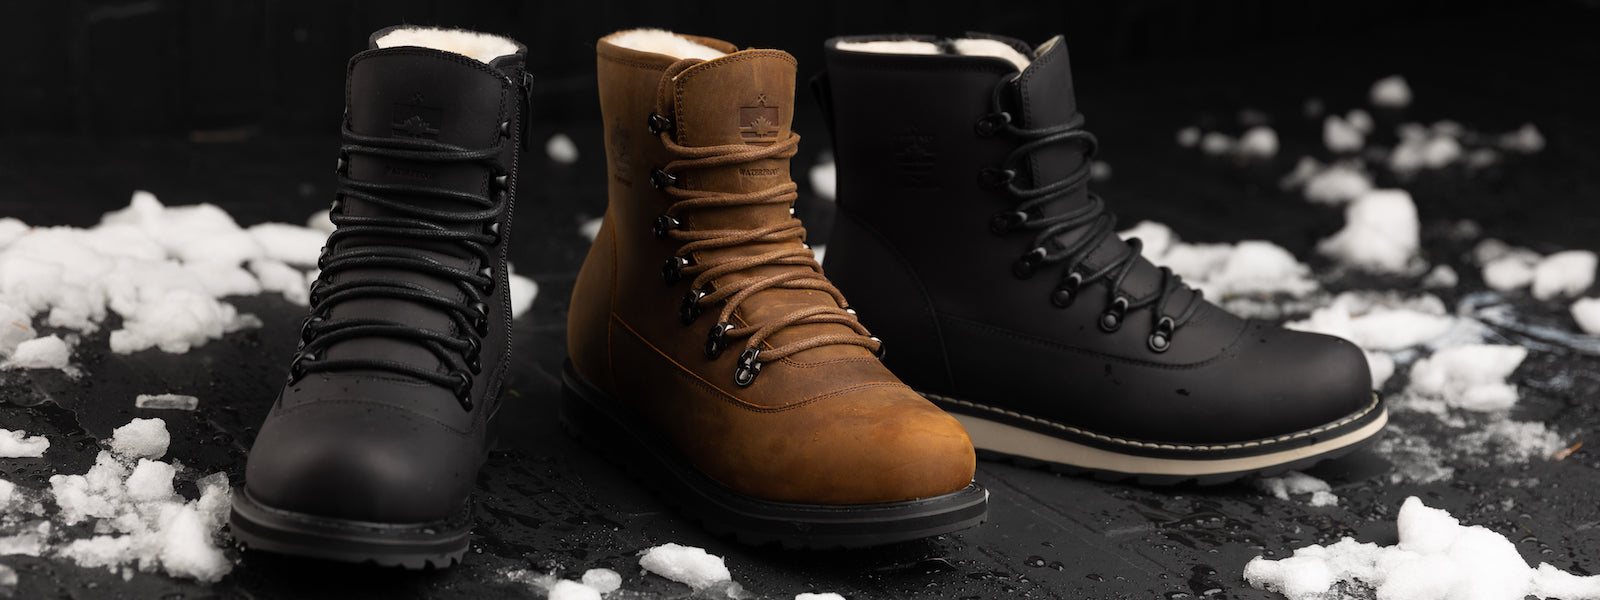 Men's Armstrong Winter Boots in the Snow